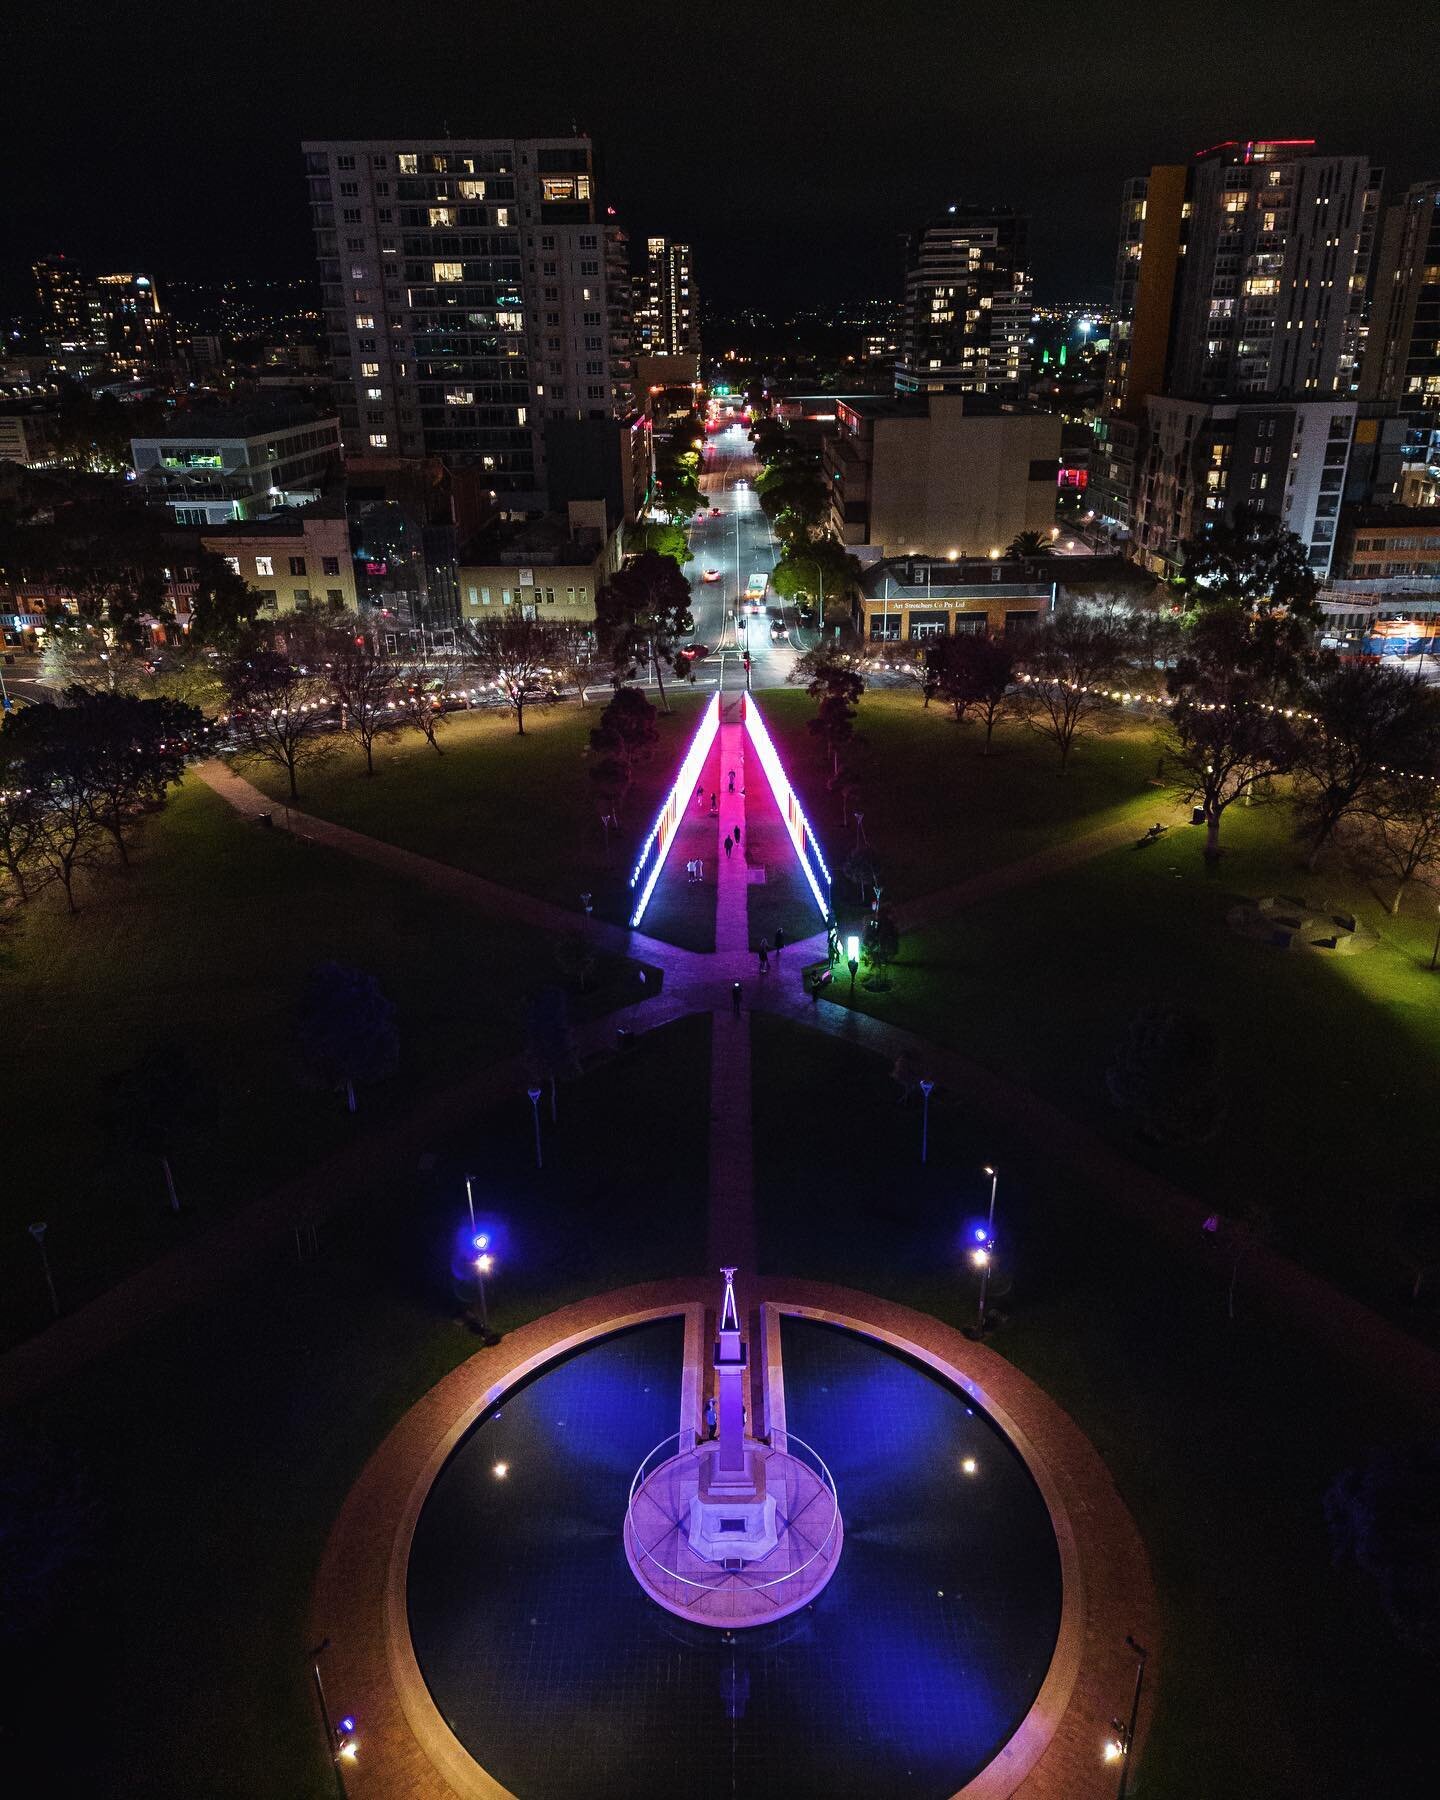 ⁠ A Look above Illuminate Adelaide, so much to see and experience. 

Find out more via our new updated website - www.airworks.com.au⁠
⁠
#airworks #drone #droneoperators #dronepilot #dronephotography #dronephoto #dronefootage #dronenerds #dronelife #d